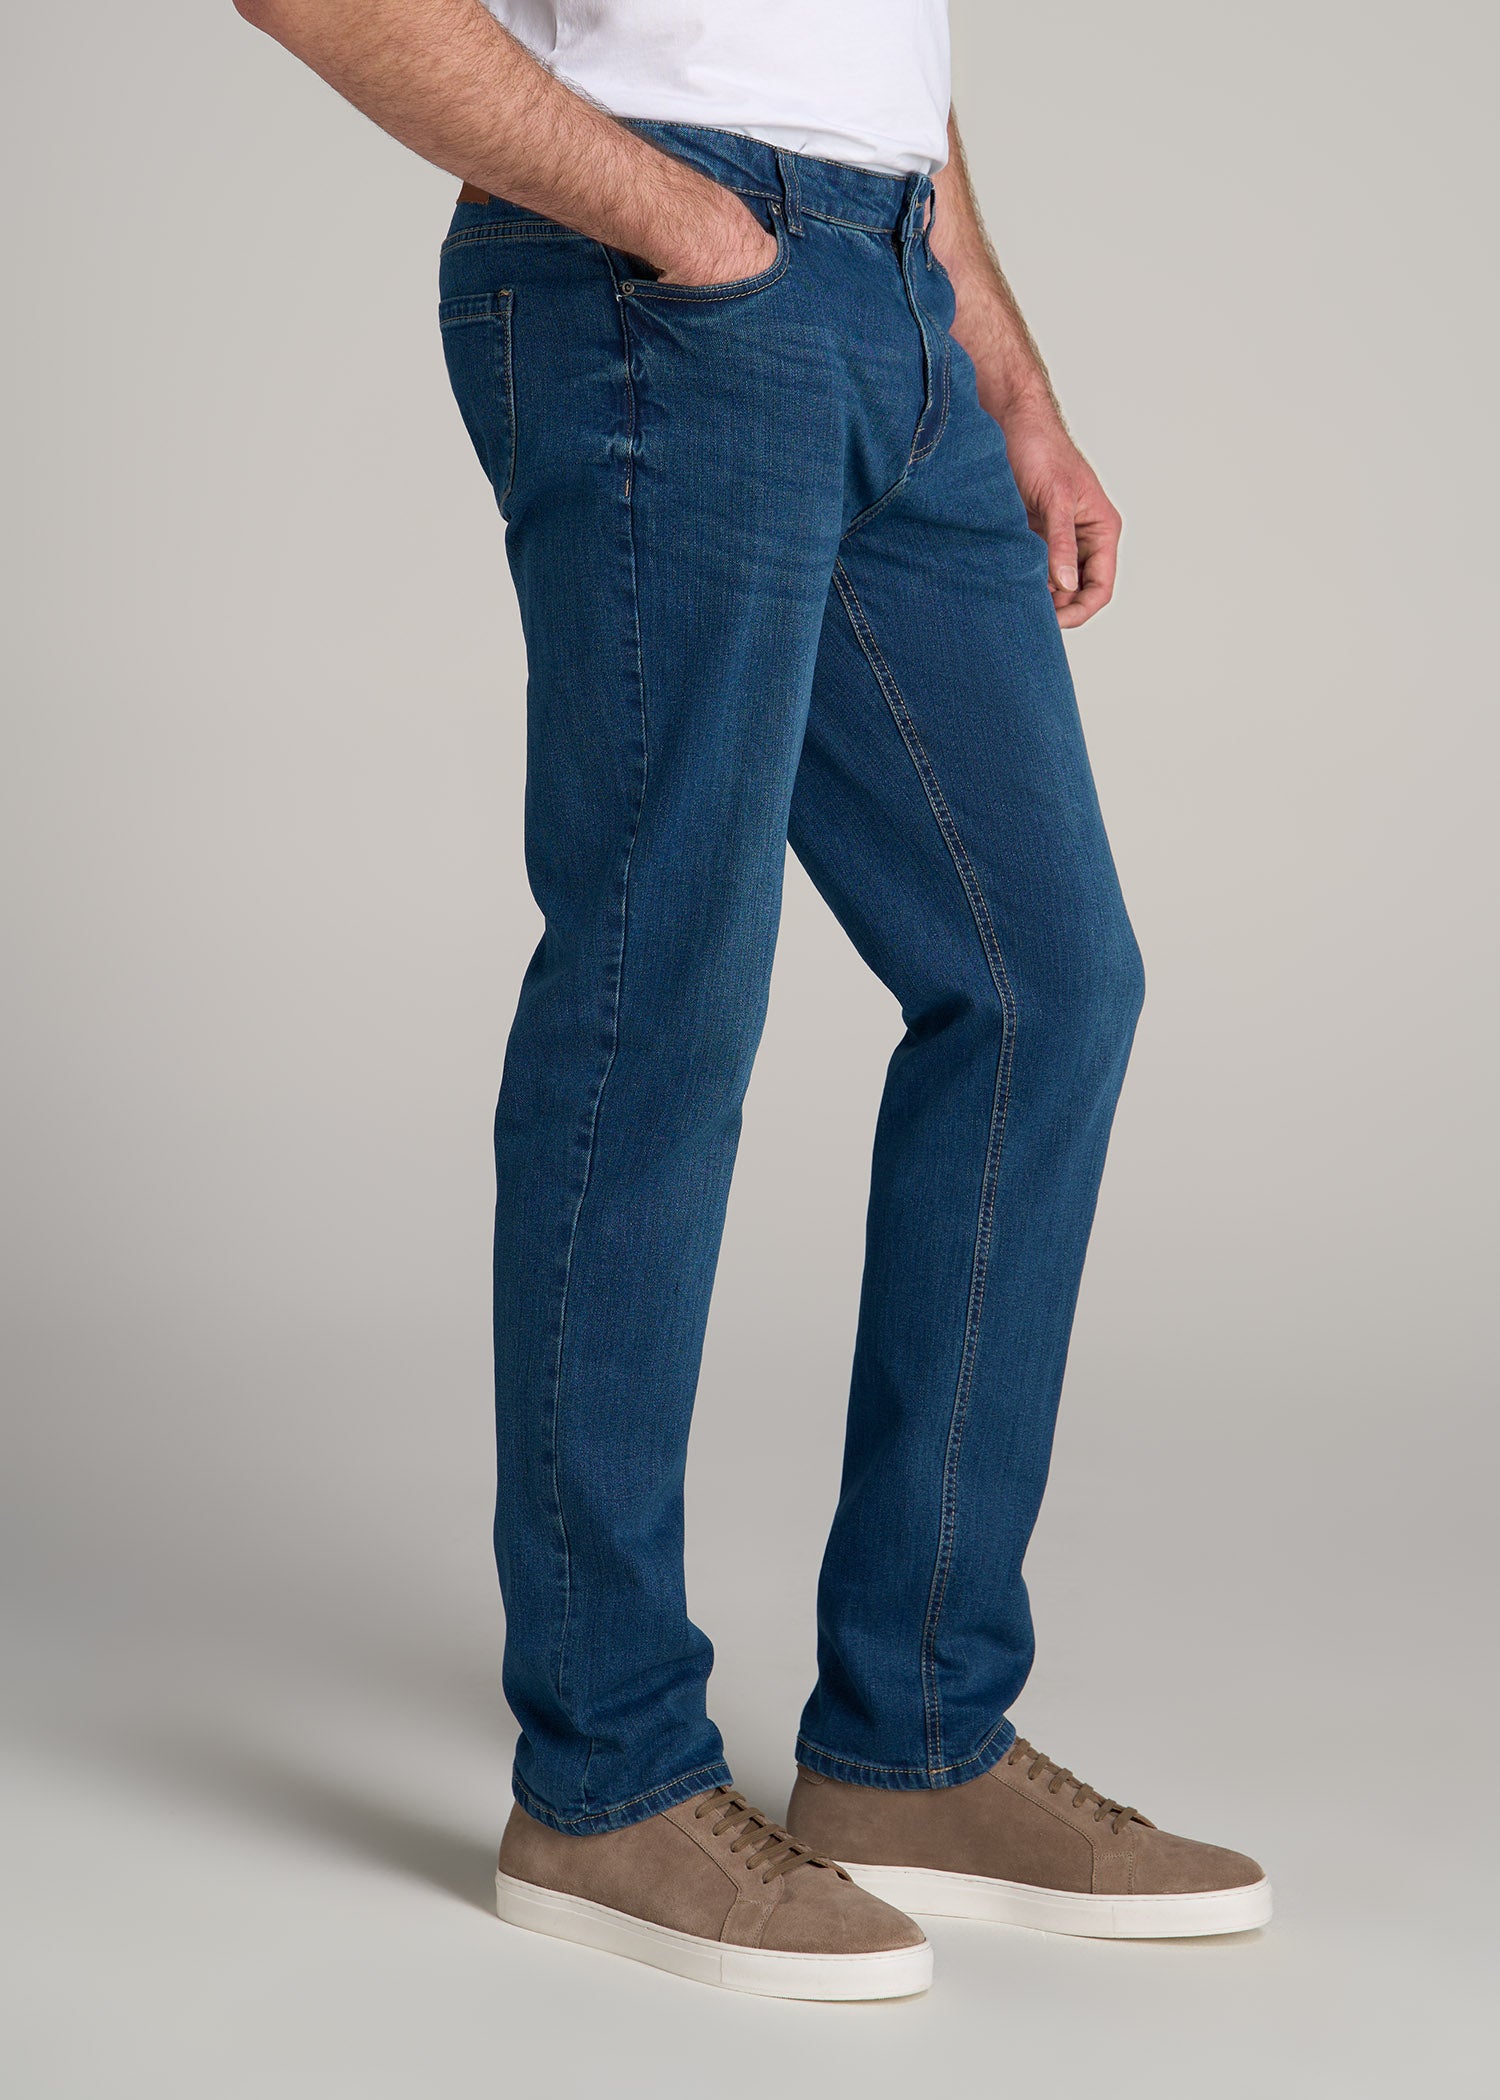 Semi-Relaxed Men's Jeans Signature Fade | American Tall